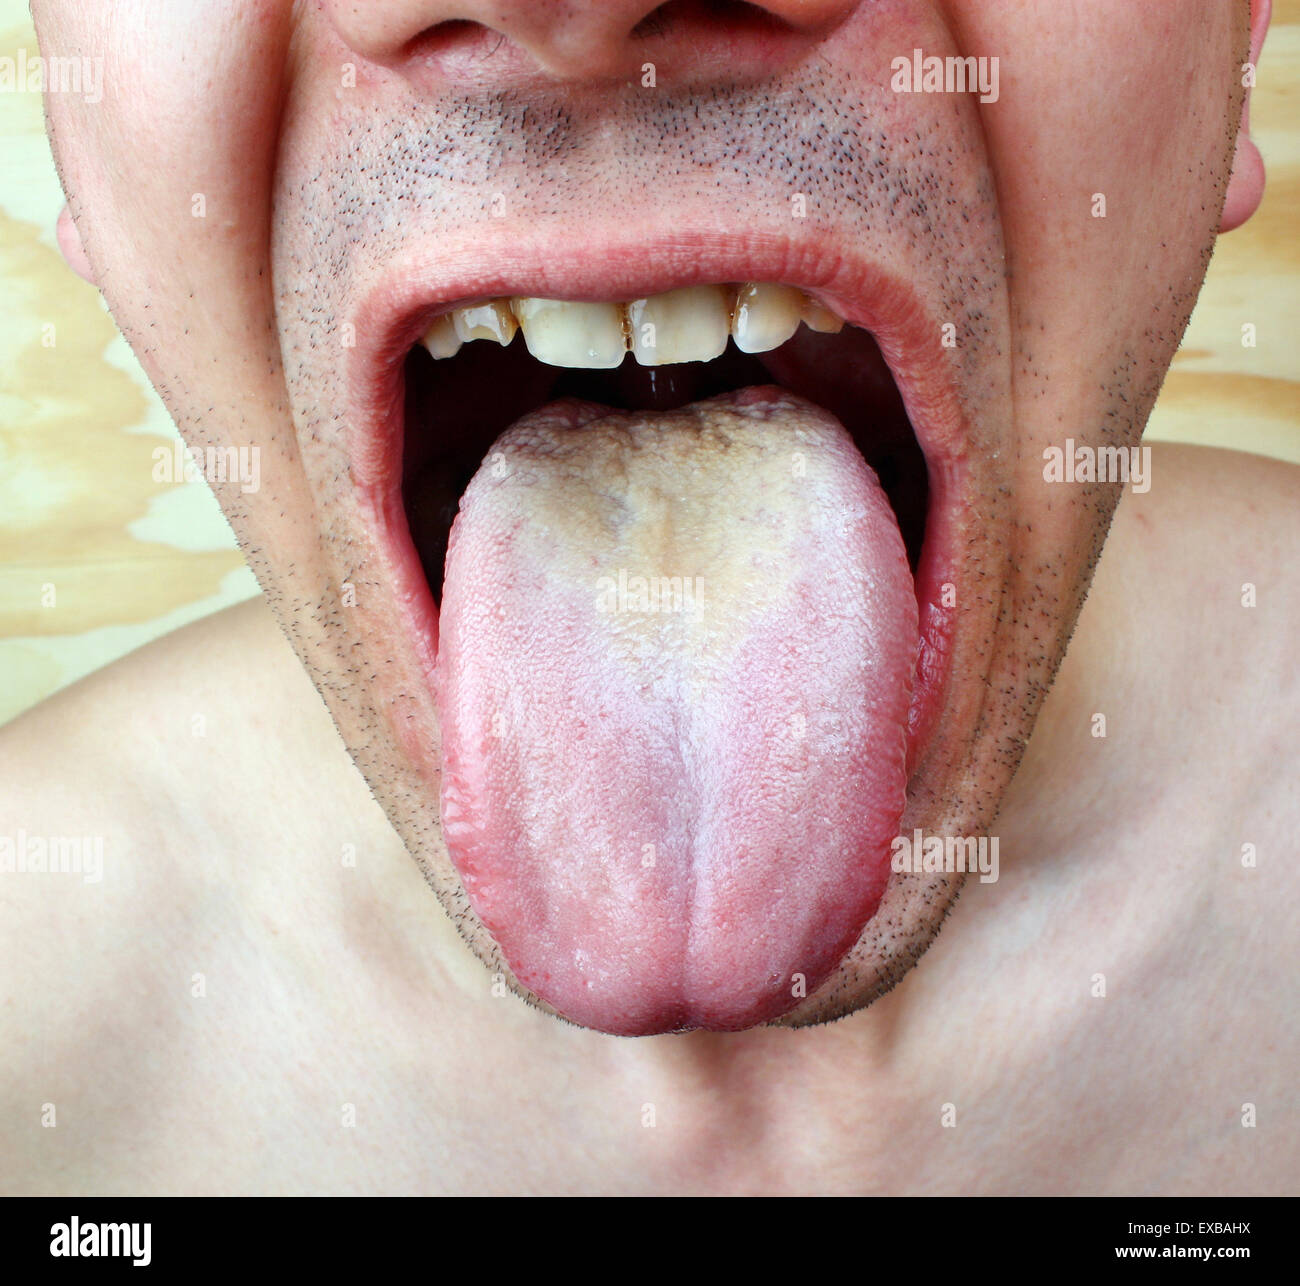 Infection tongue disease candida albicans Stock Photo